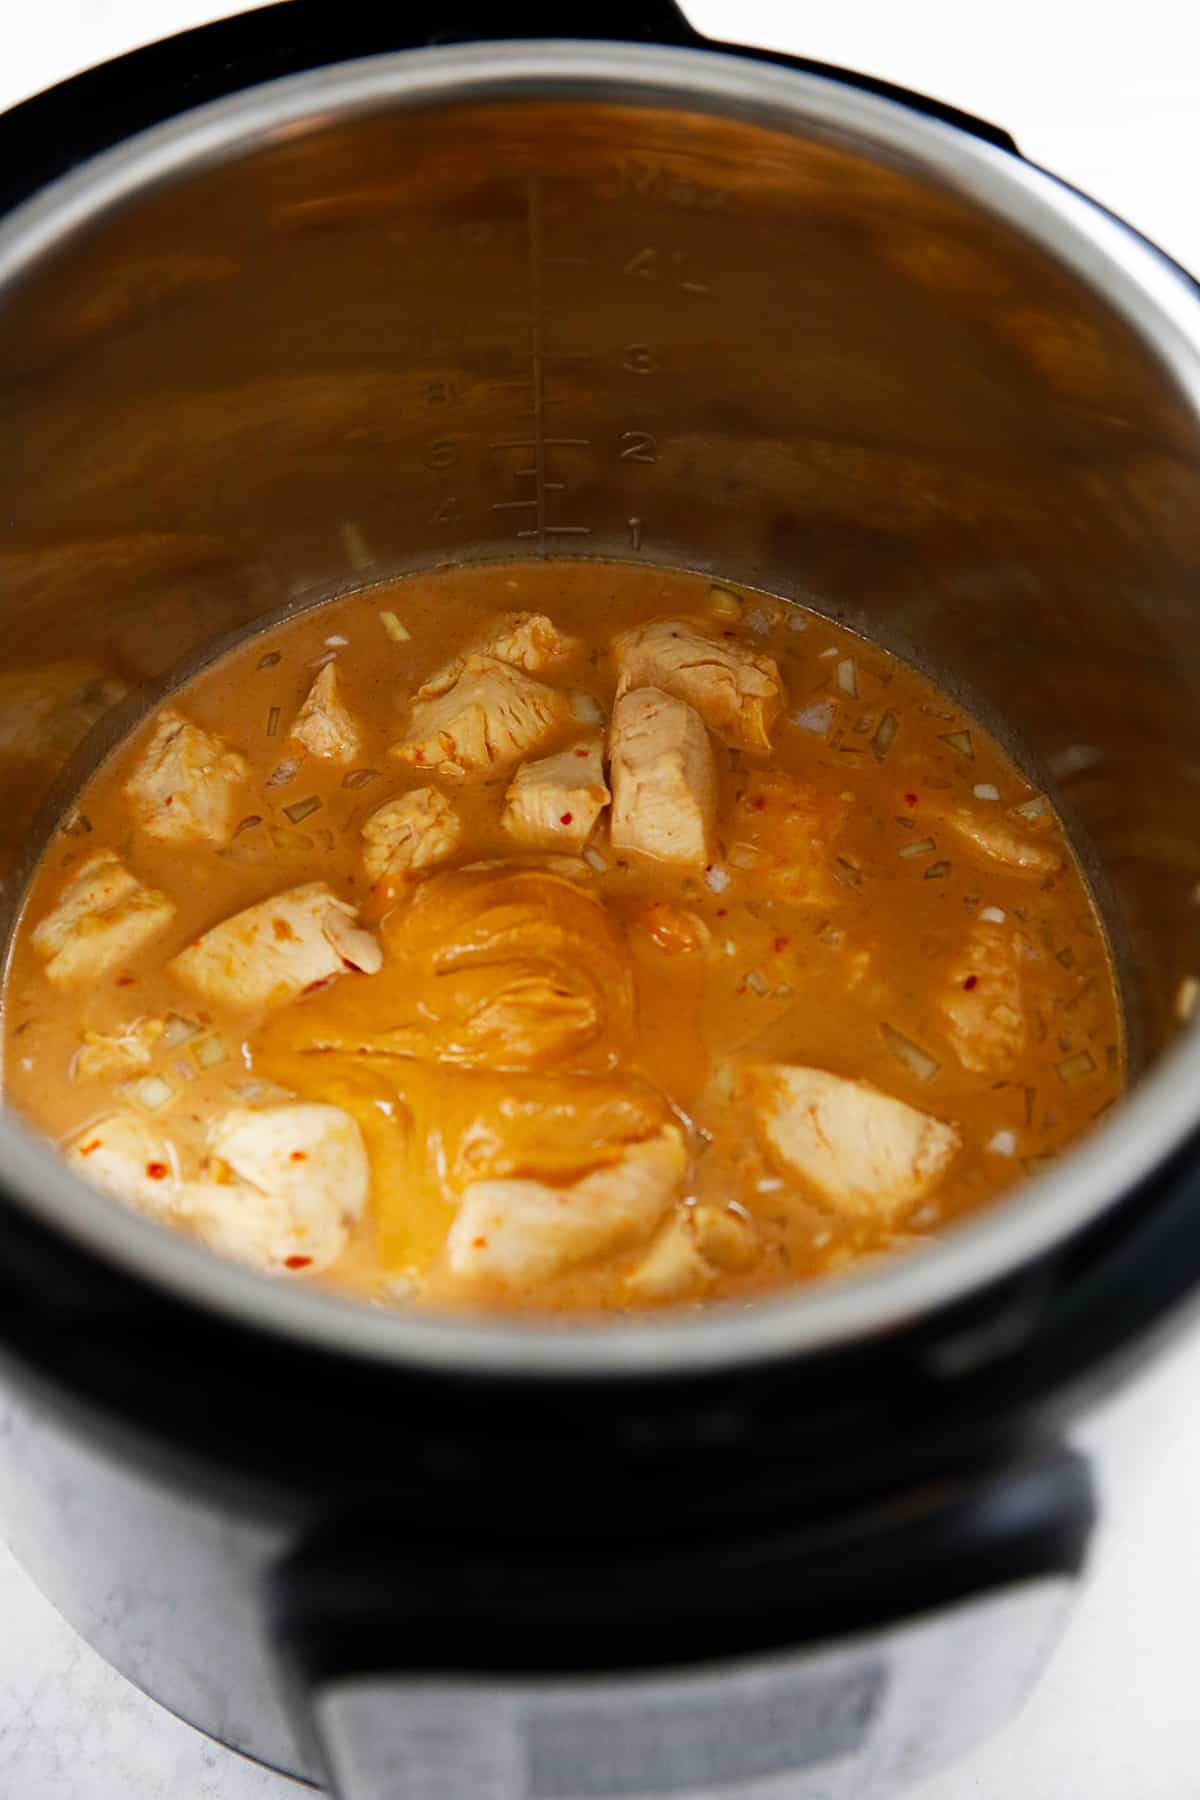 Peanut butter in the center of the instant pot to make Thai peanut chicken.